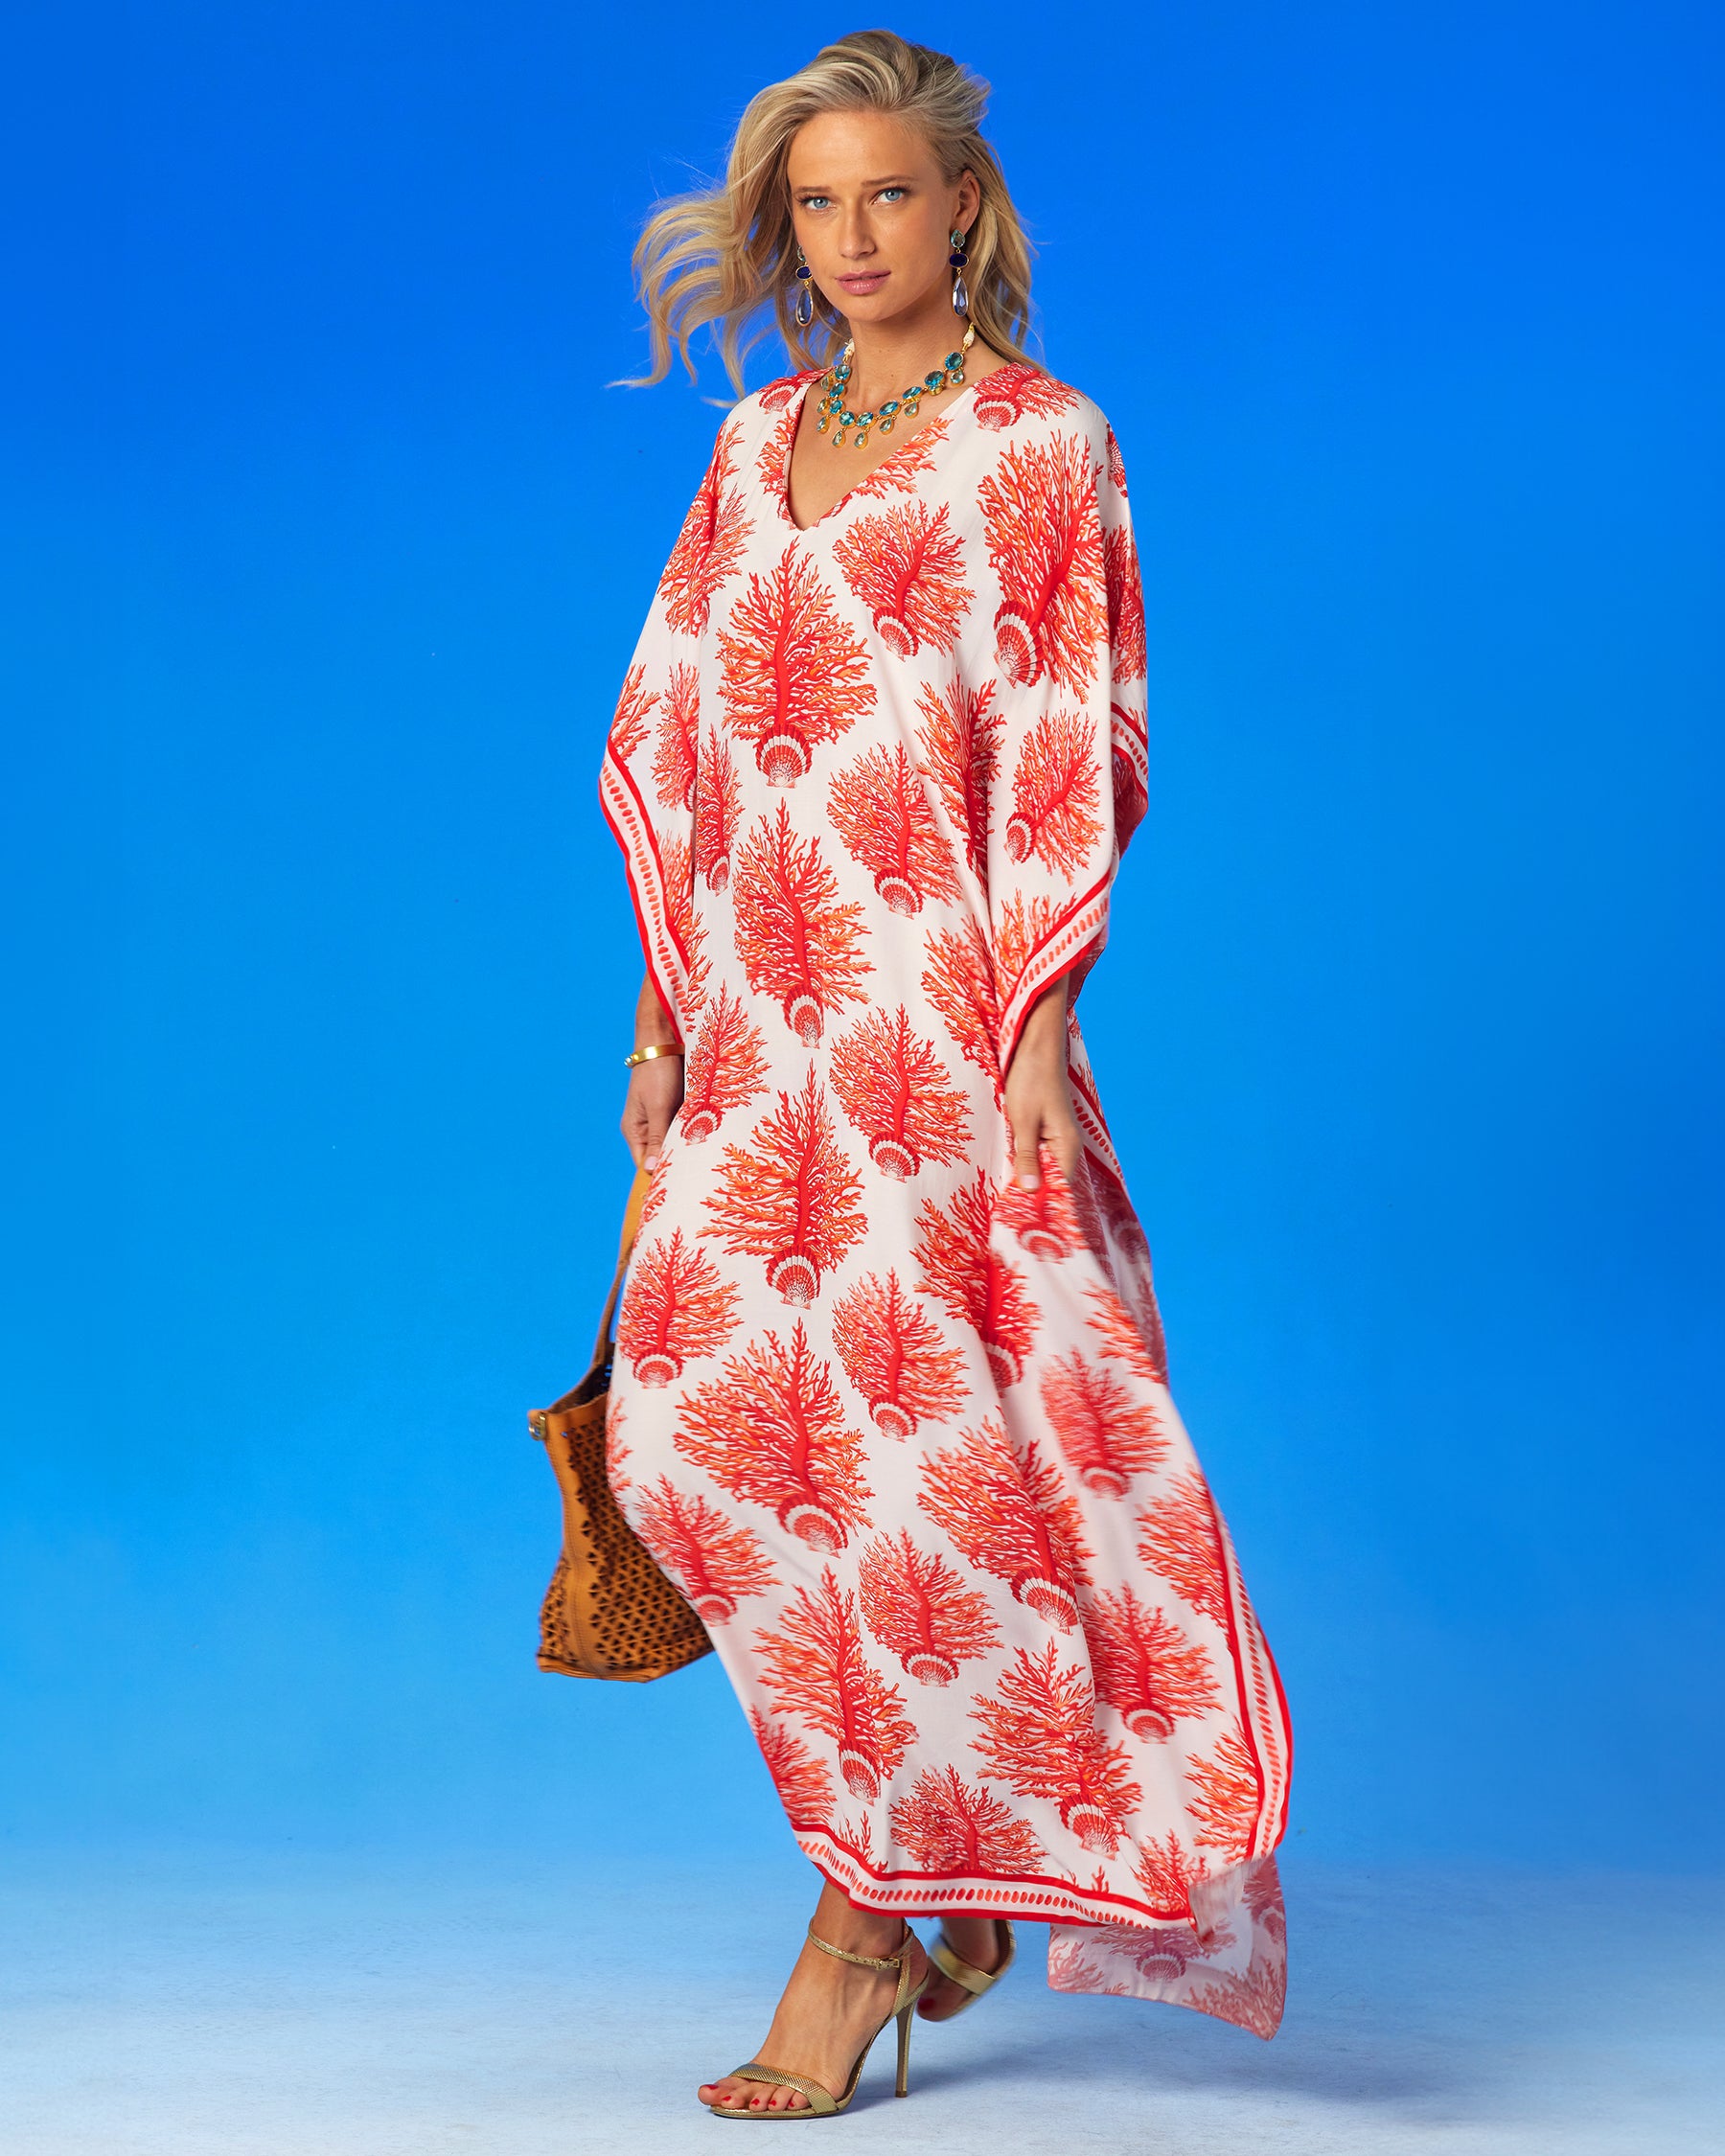 Carolina Kaftan in Red Coral and Seashell Motif with a leather tote bag